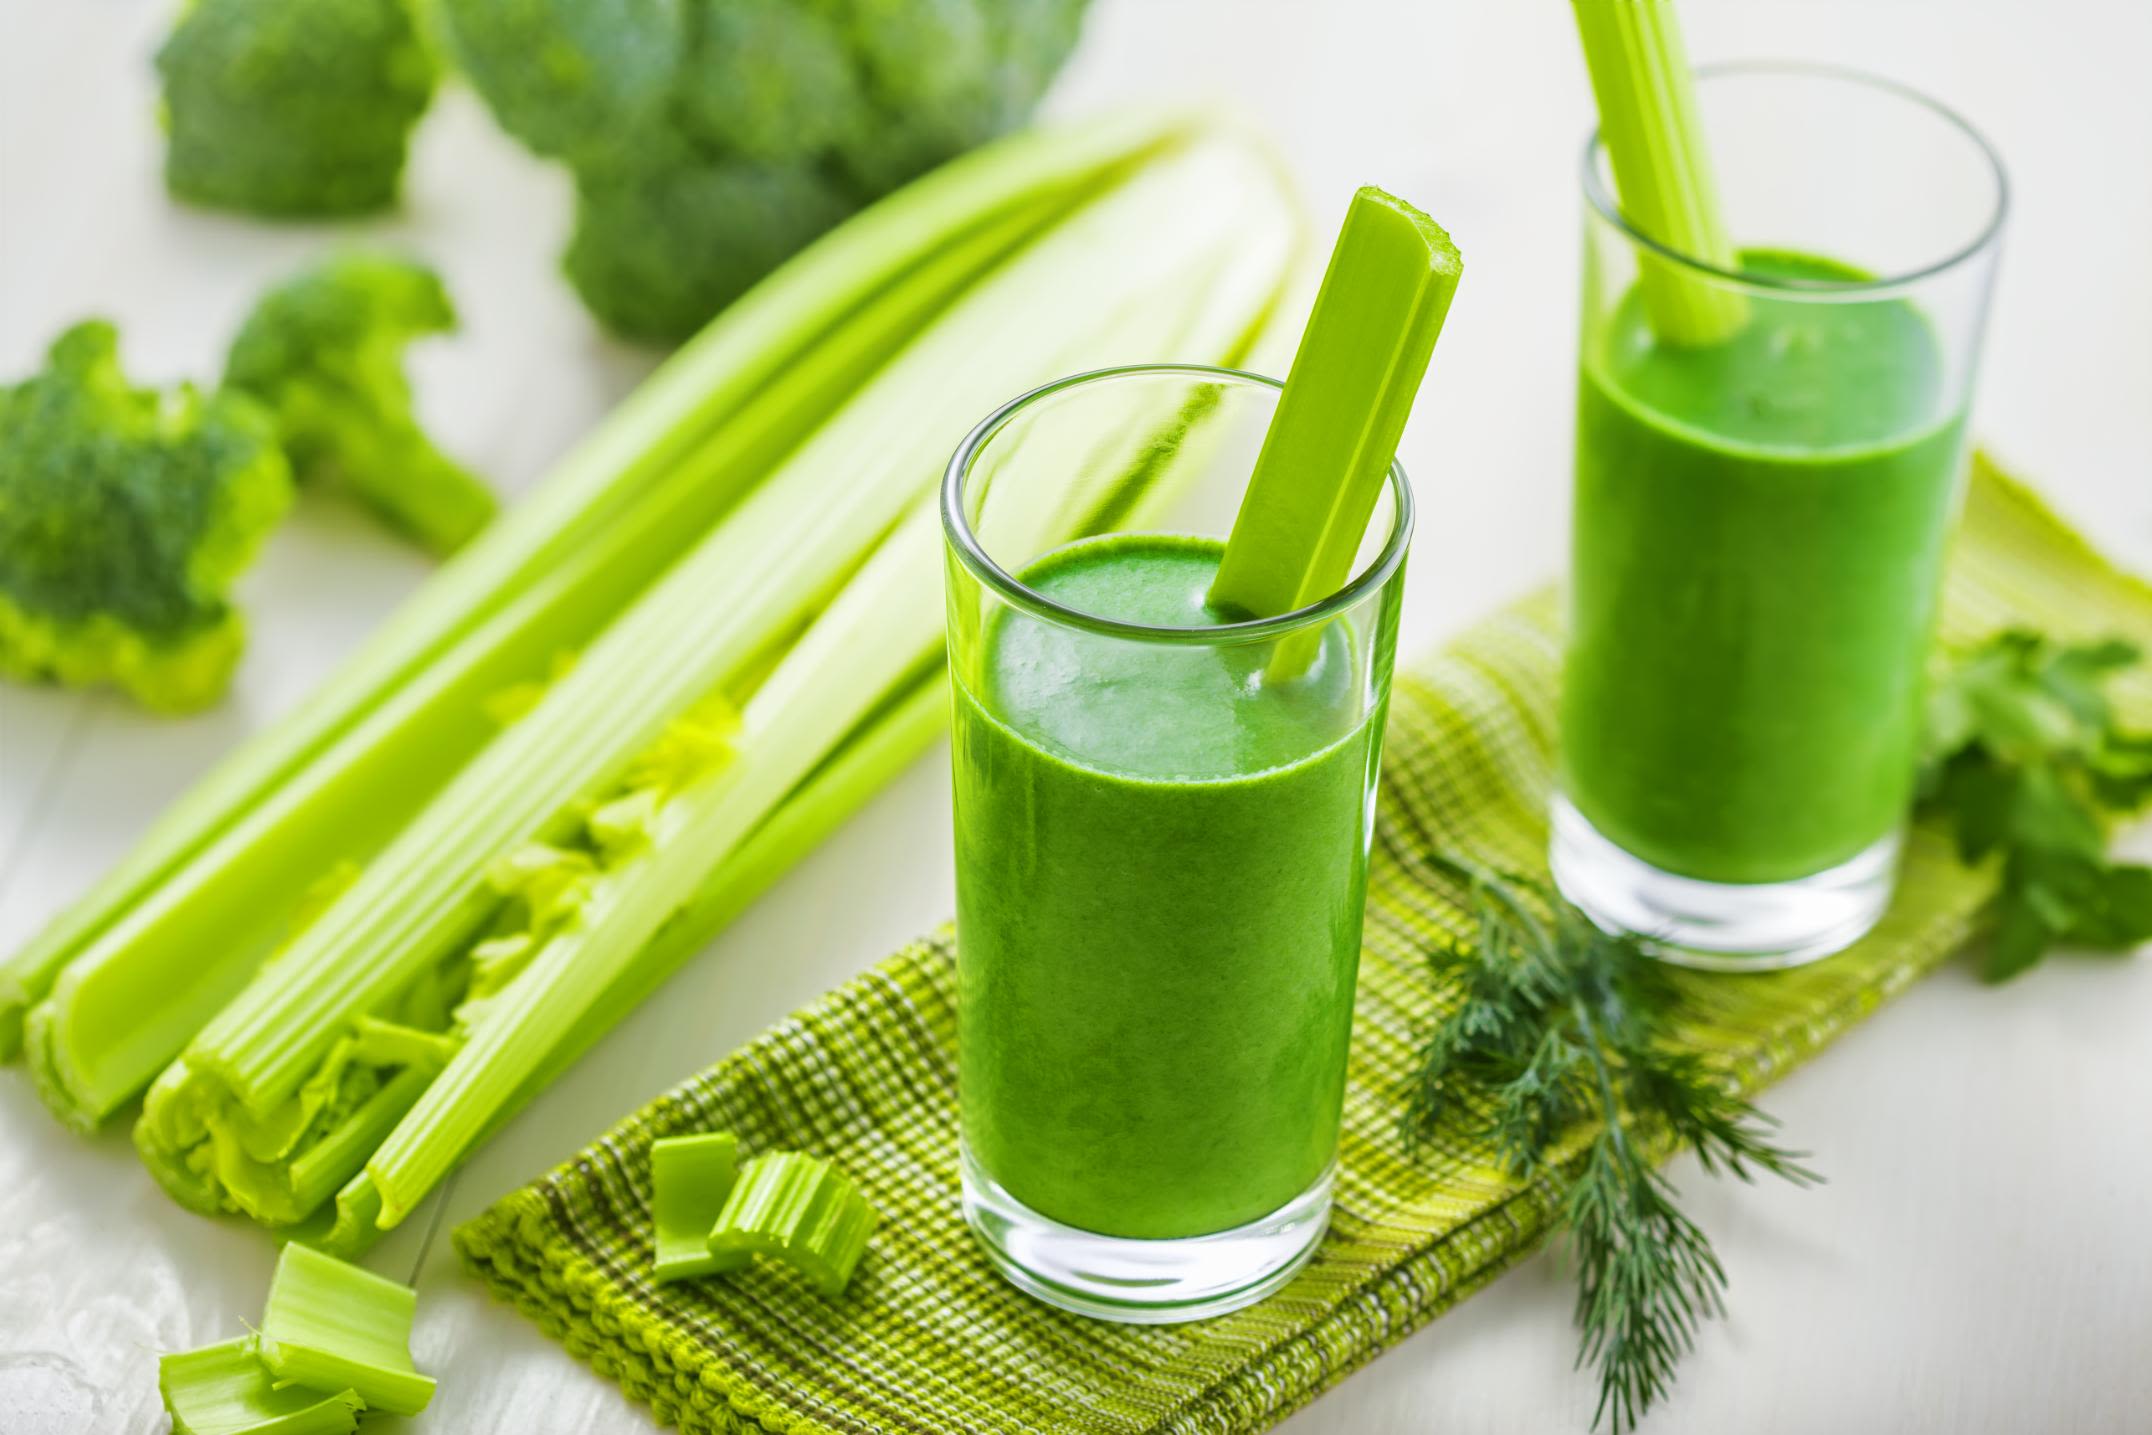 Benefits of Celery Juice: A Comprehensive Review Based on Scientific...